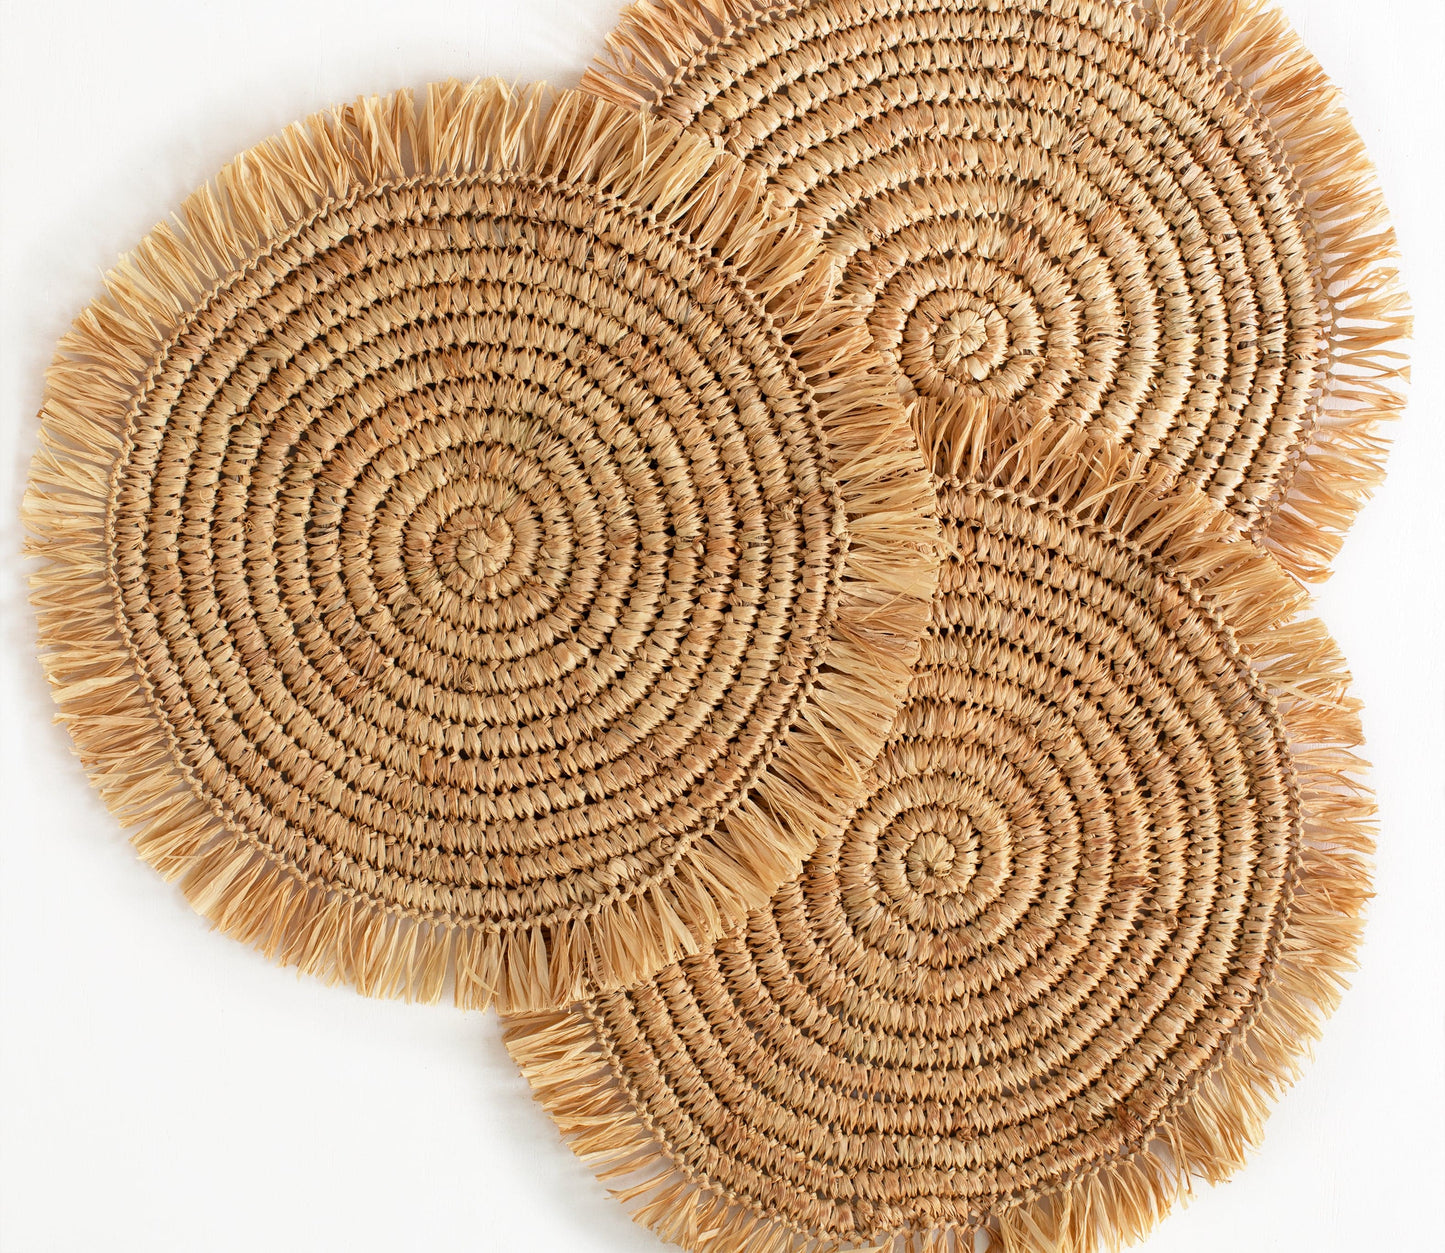 The Carpentry Shop Co. Handmade Raffia Placemats by Local Artisan